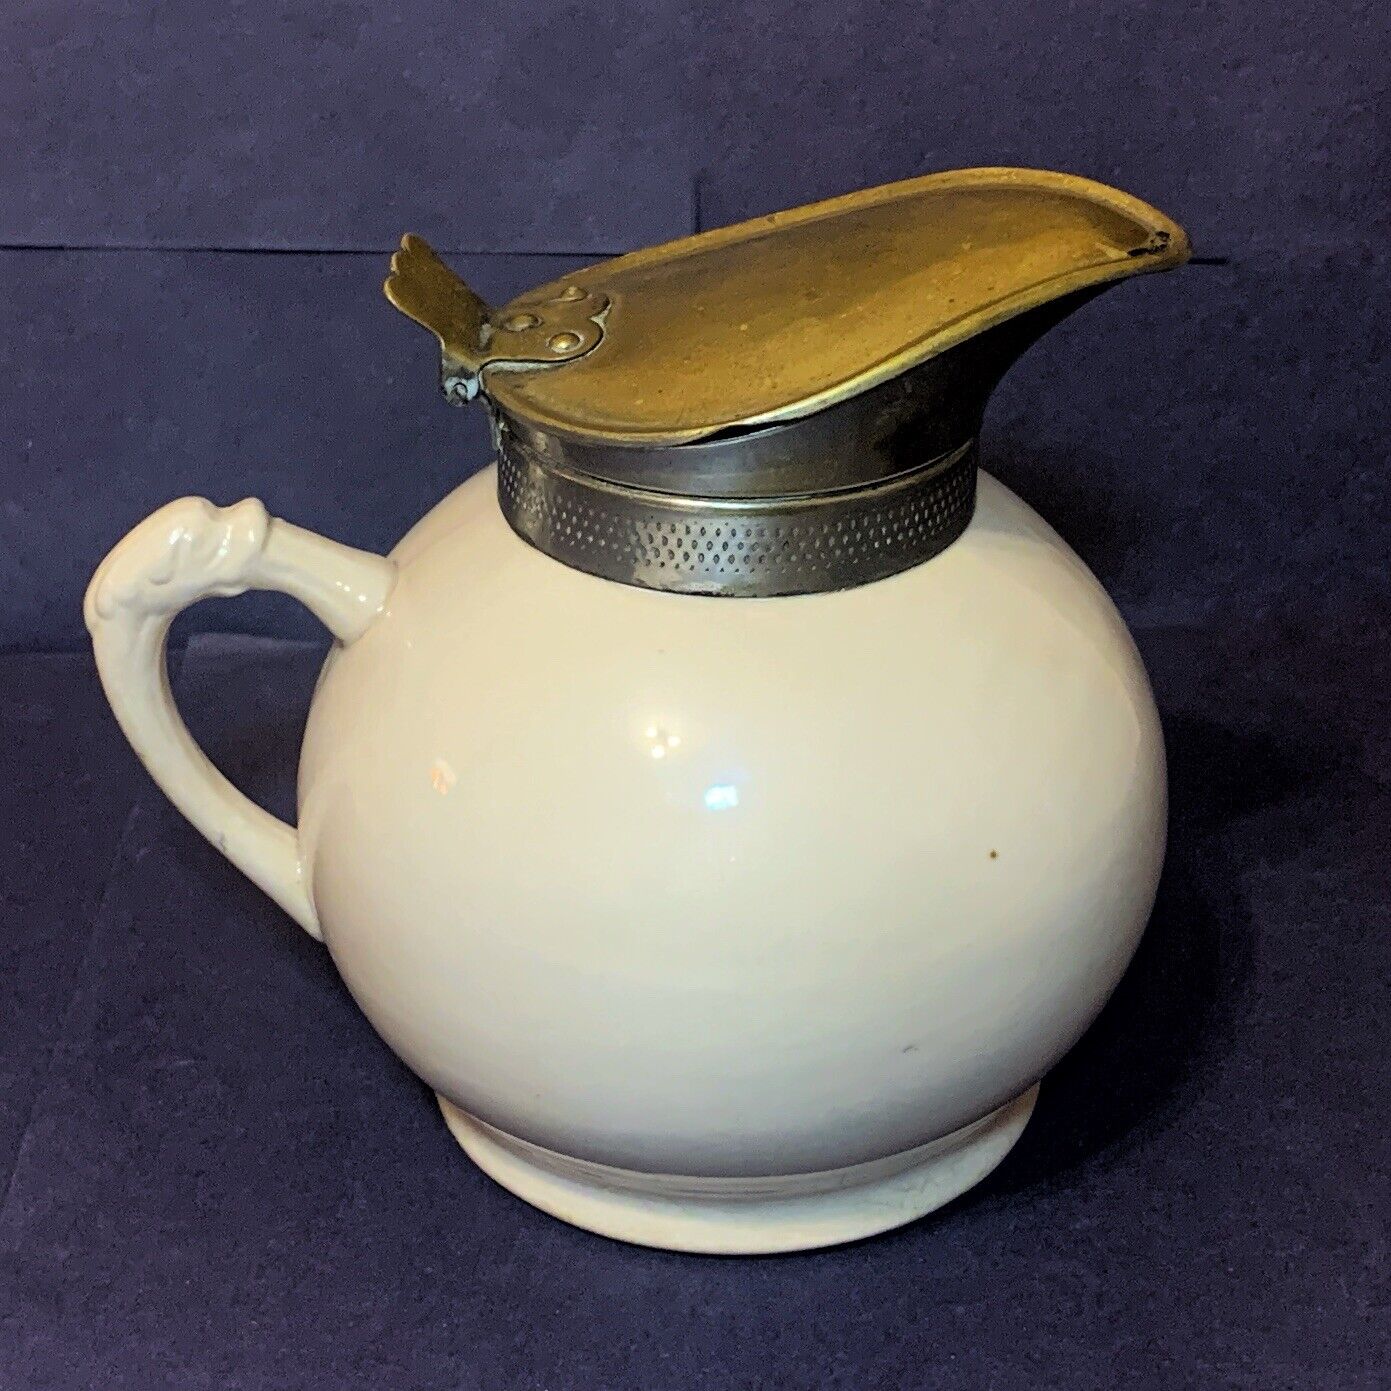 Antique Laughlin Ceramic Syrup Yellow Ware Dispenser with Metal Lid 1894 to 1905